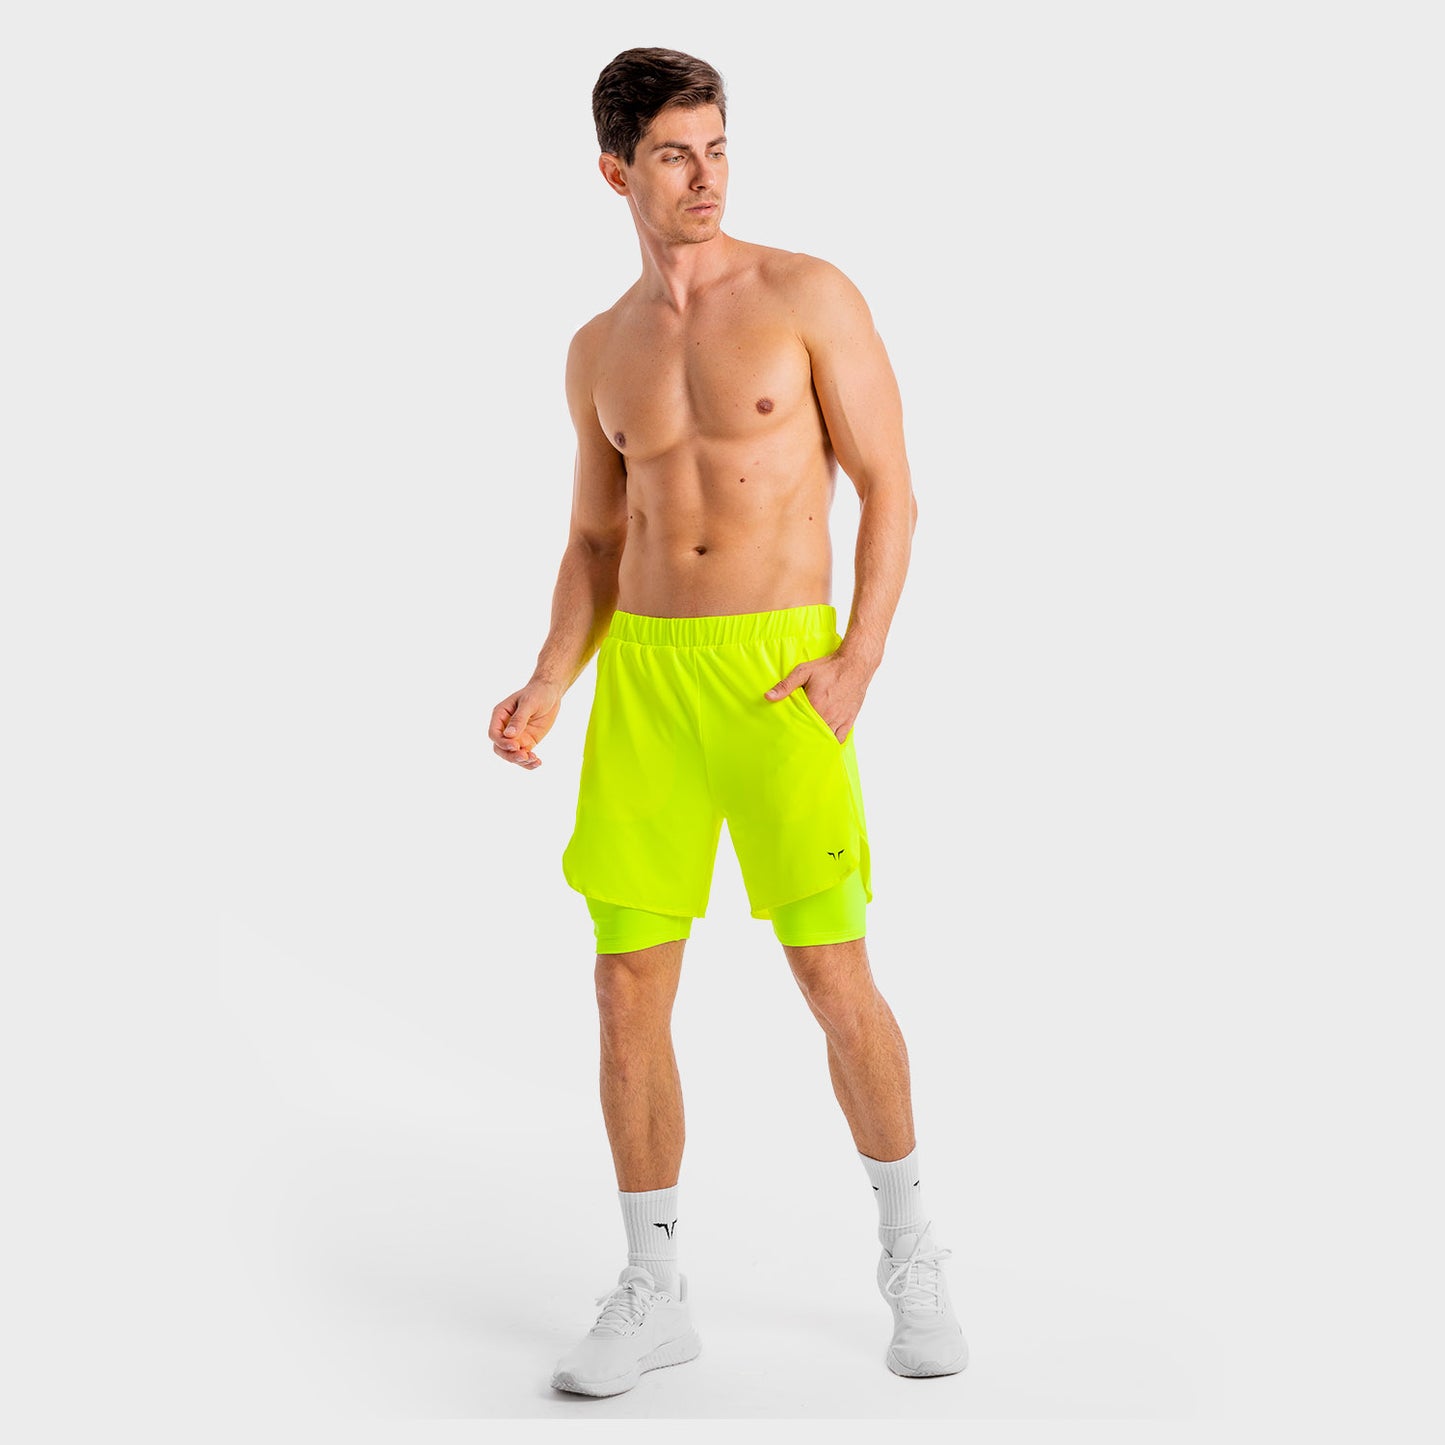 squatwolf-workout-short-for-men-core-mesh-2-in-1-shorts-neon-gym-wear